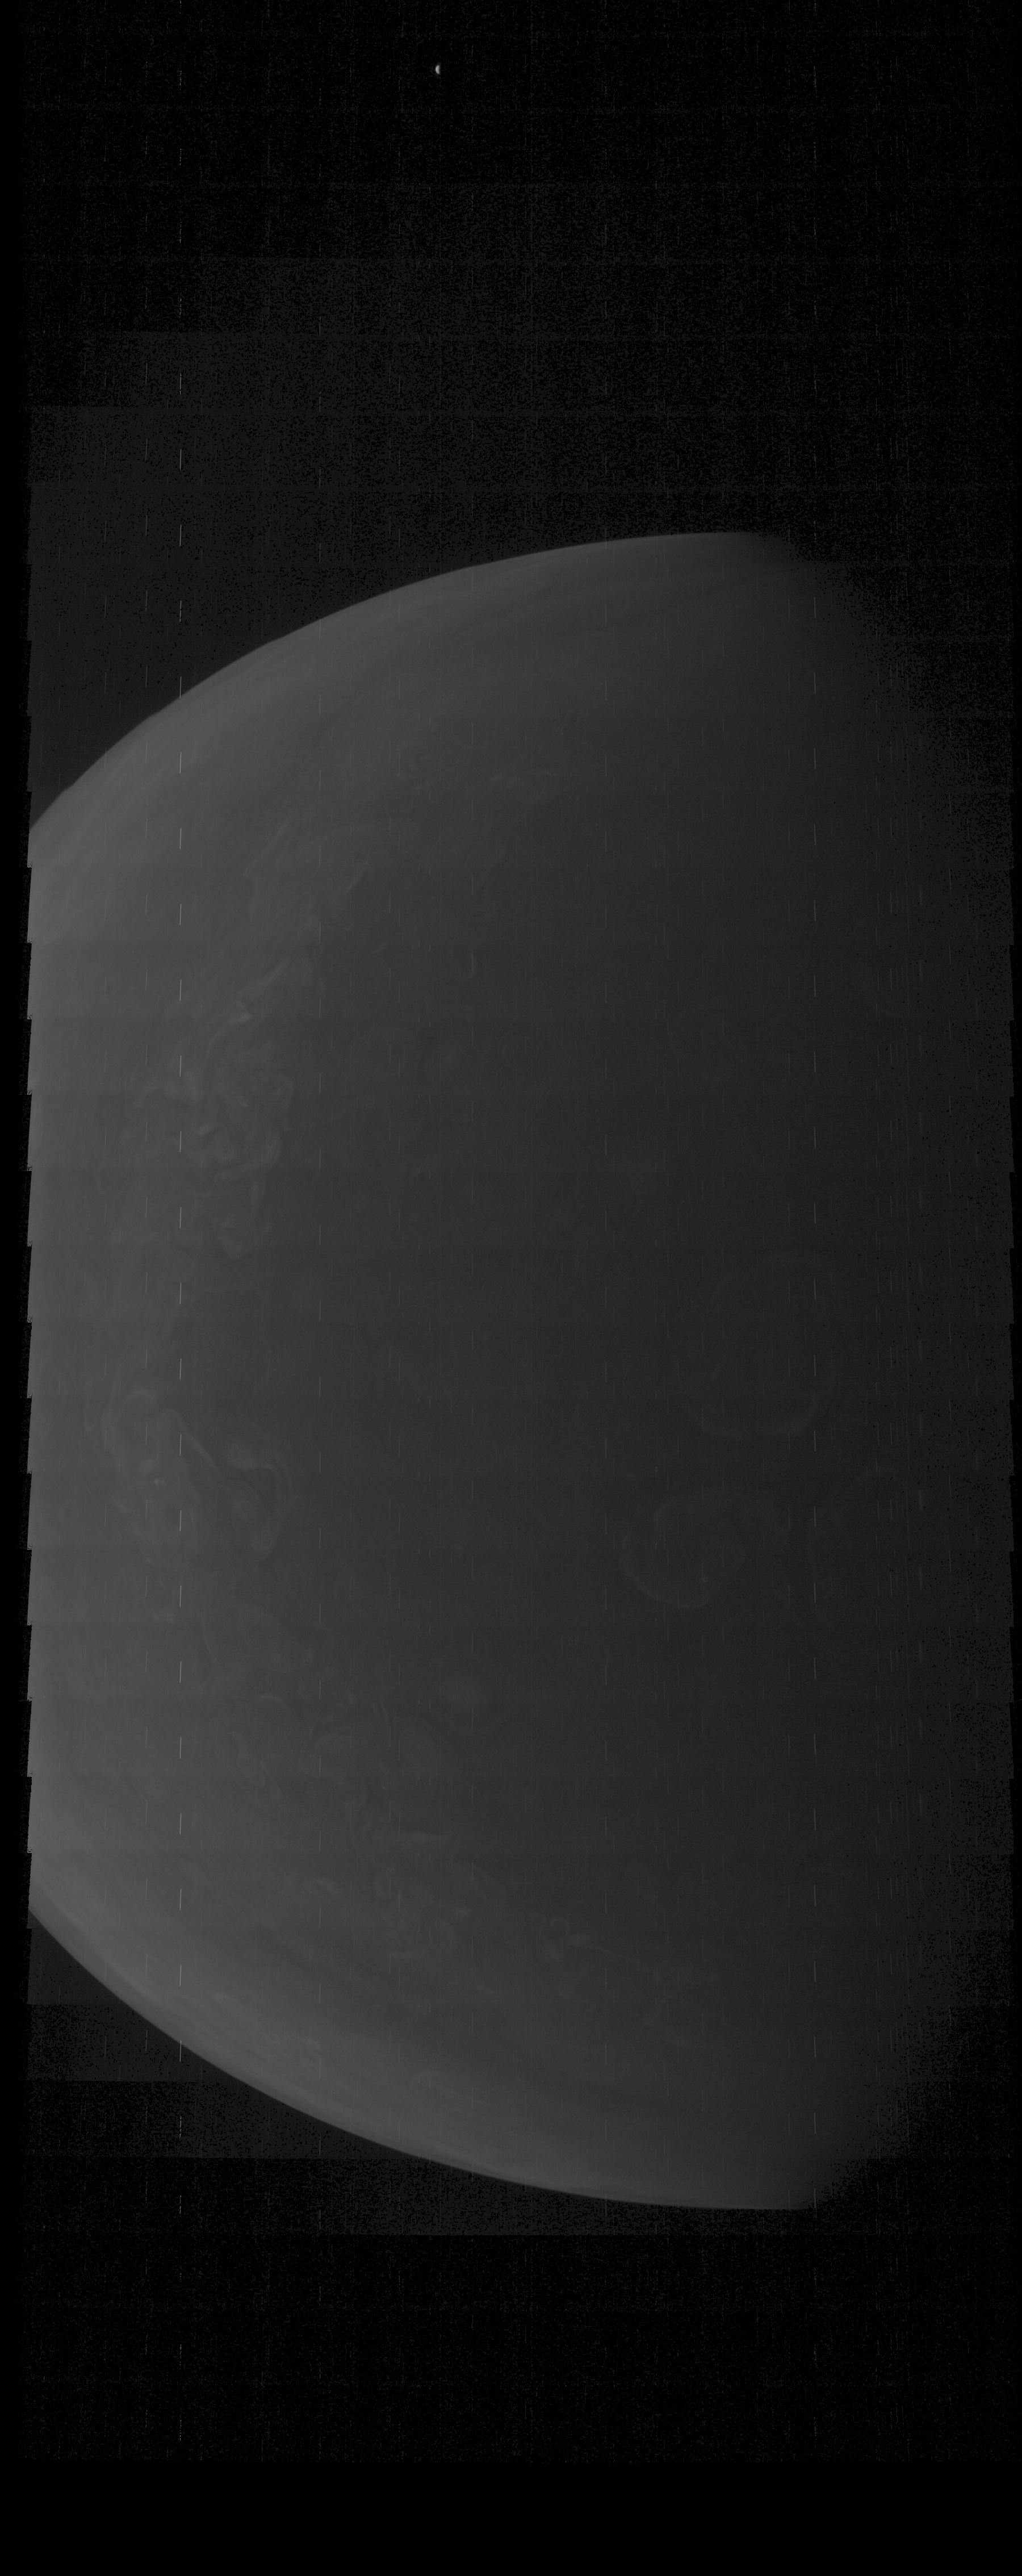 JNCE_2022056_40M00013_V01-raw_proc_hollow_sphere_m_pj_out.BMP_thumbnail_.png